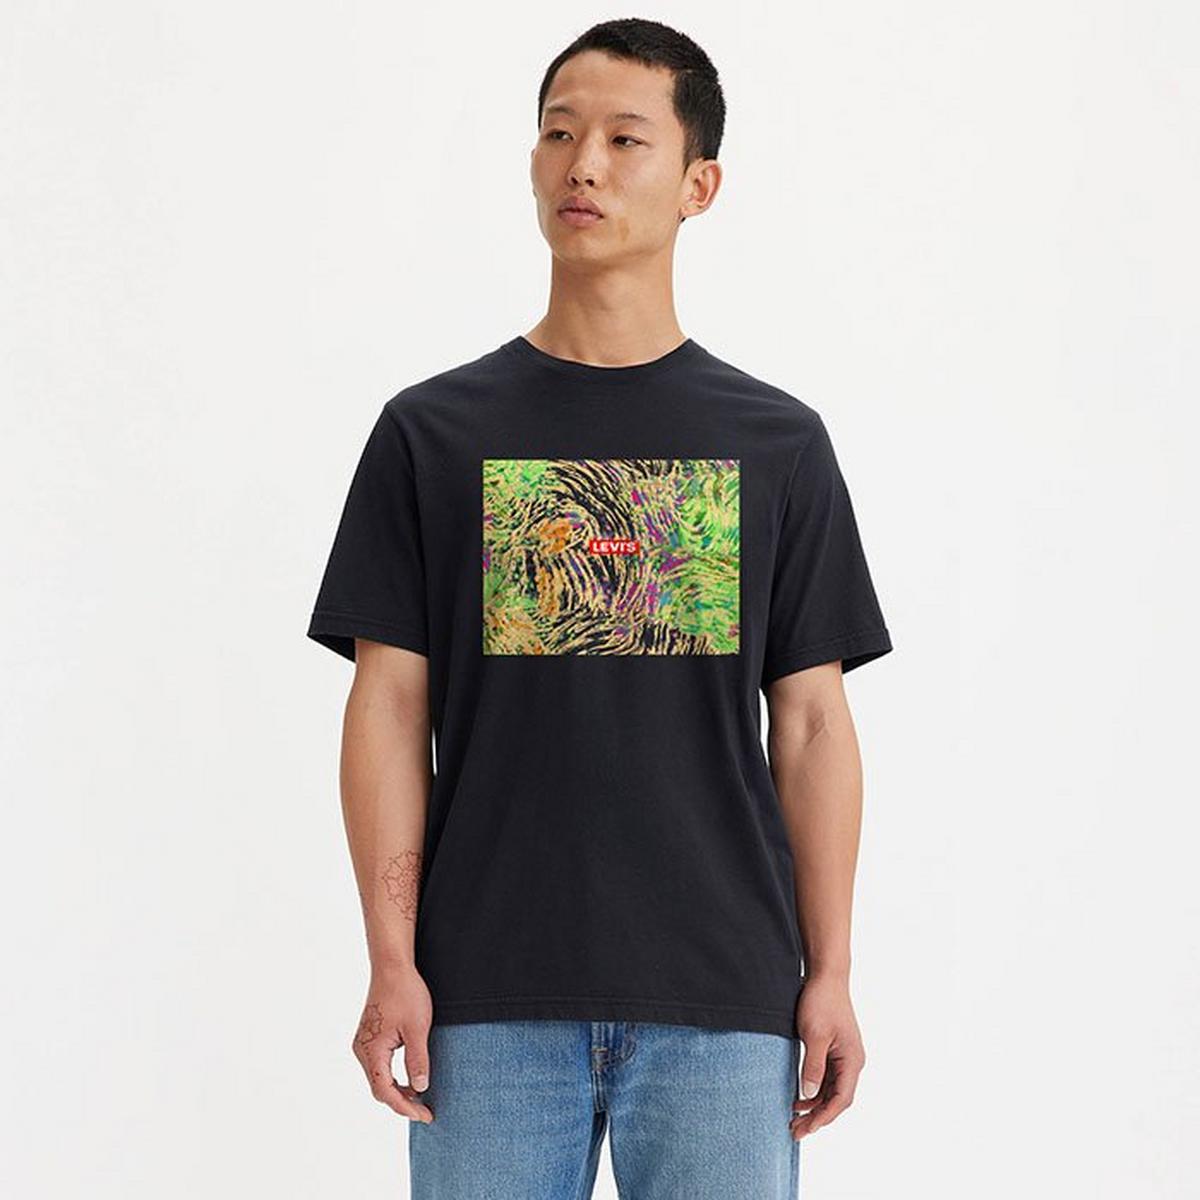 Men's Relaxed Fit Graphic T-Shirt